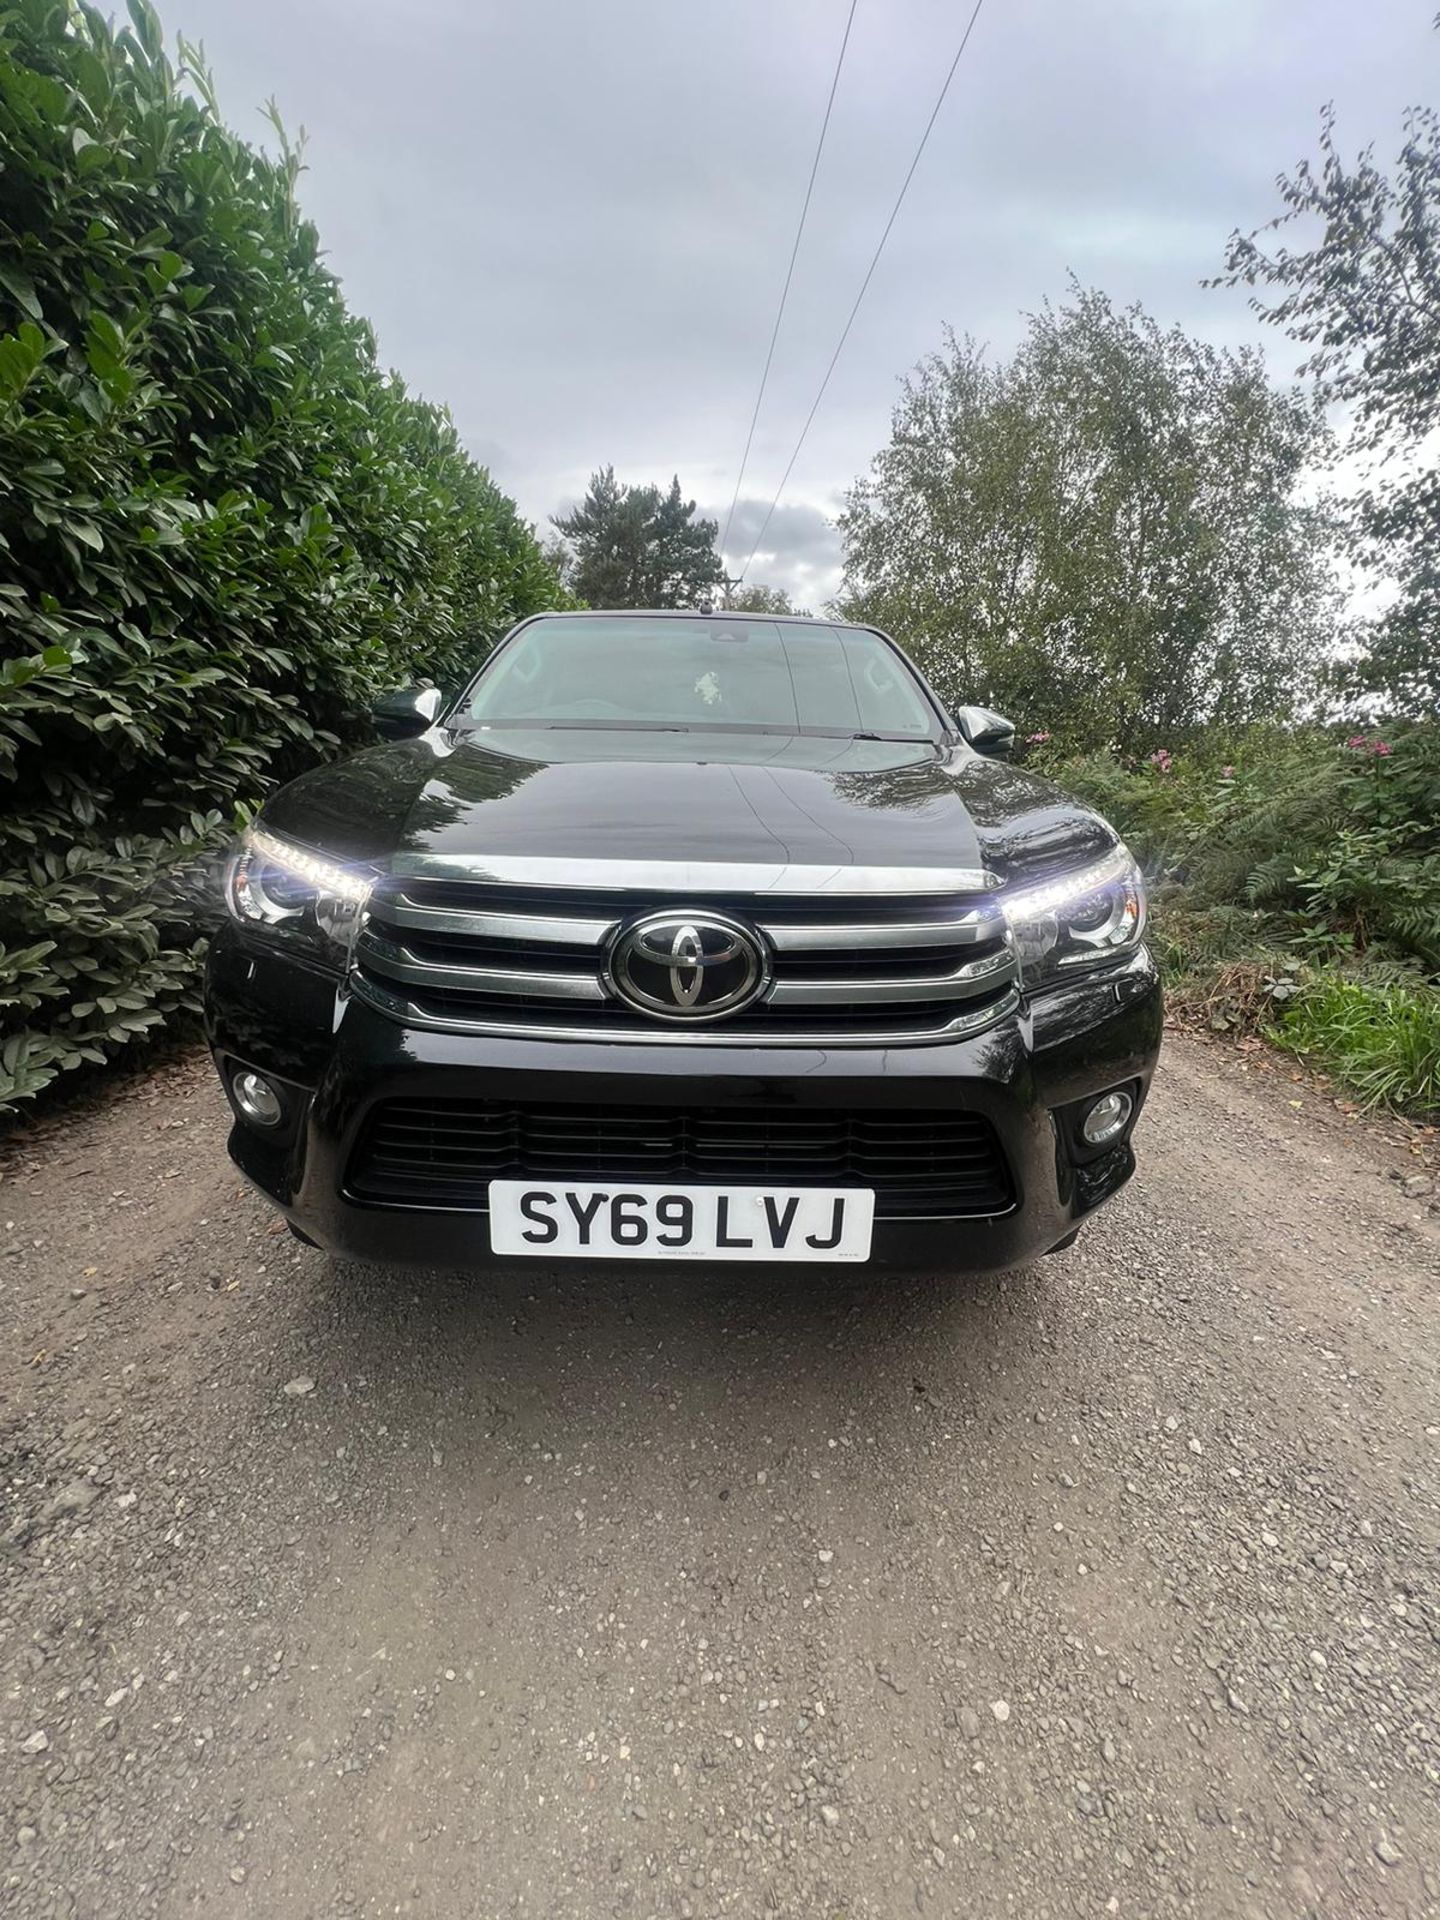 TOYOTA HILUX INVISIBLE 2019 FULL V5 - Image 15 of 15